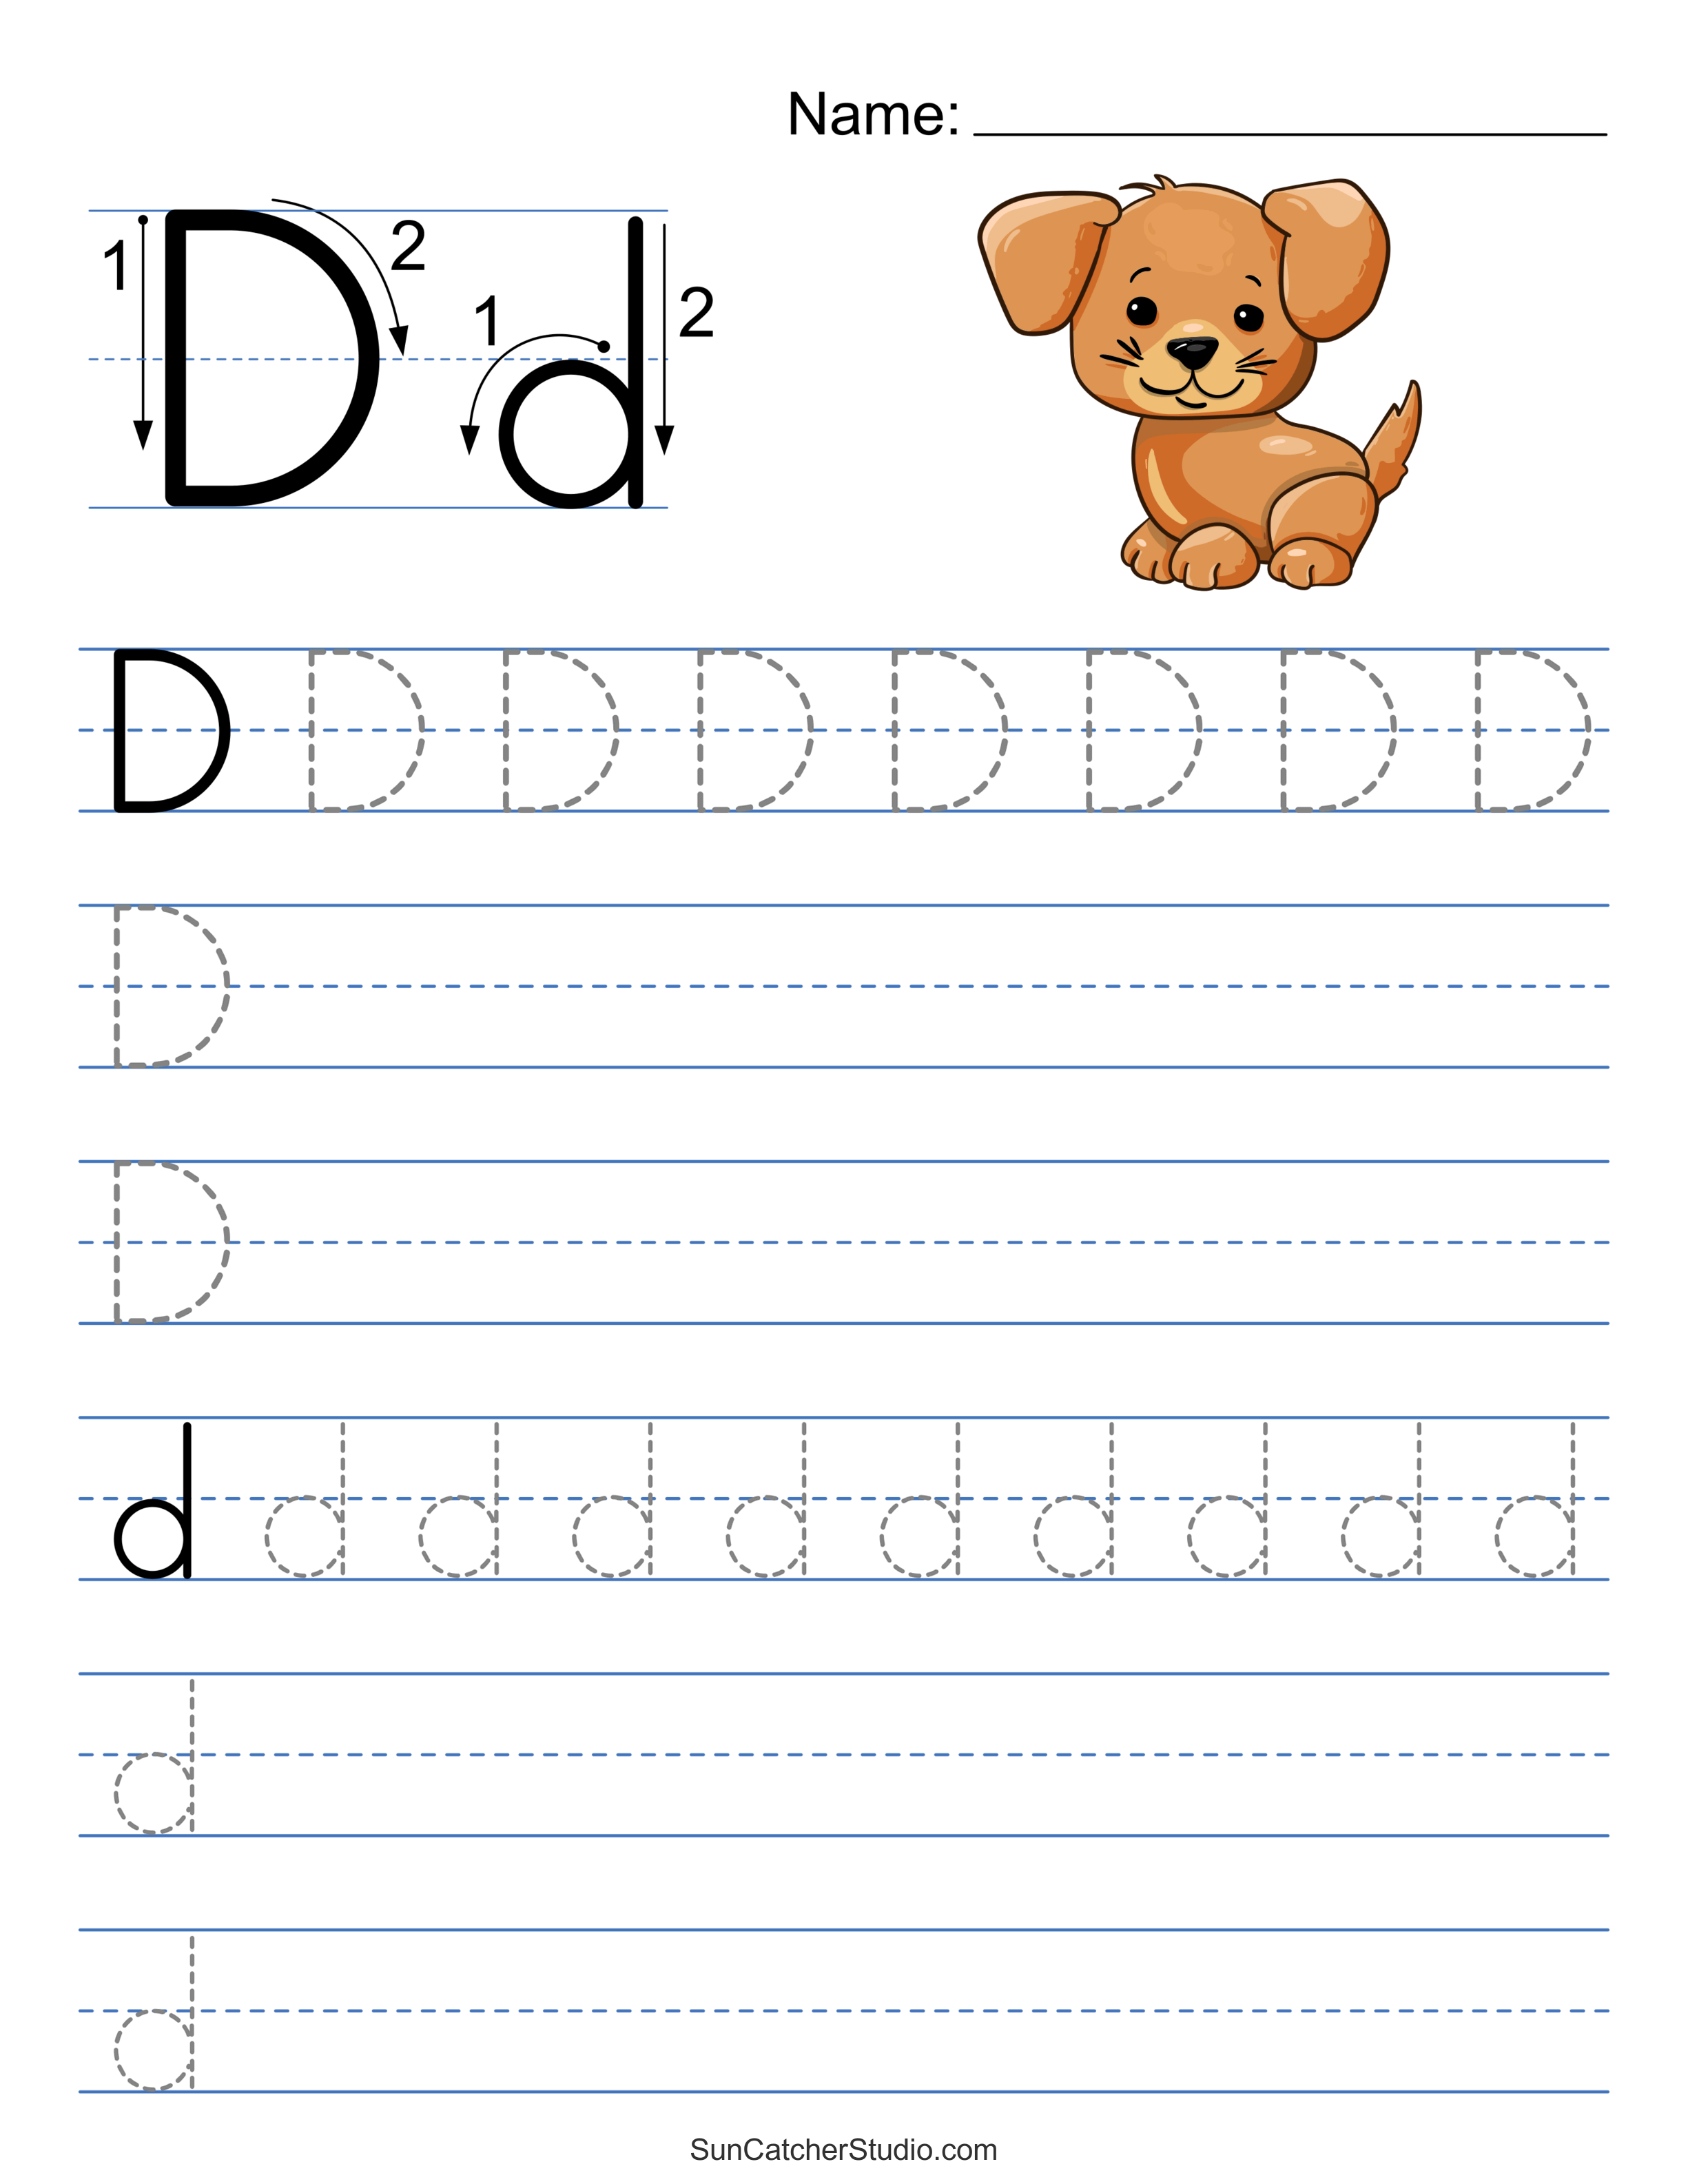 Tracing Alphabet Letters (Printable Handwriting Worksheets) – DIY Projects,  Patterns, Monograms, Designs, Templates